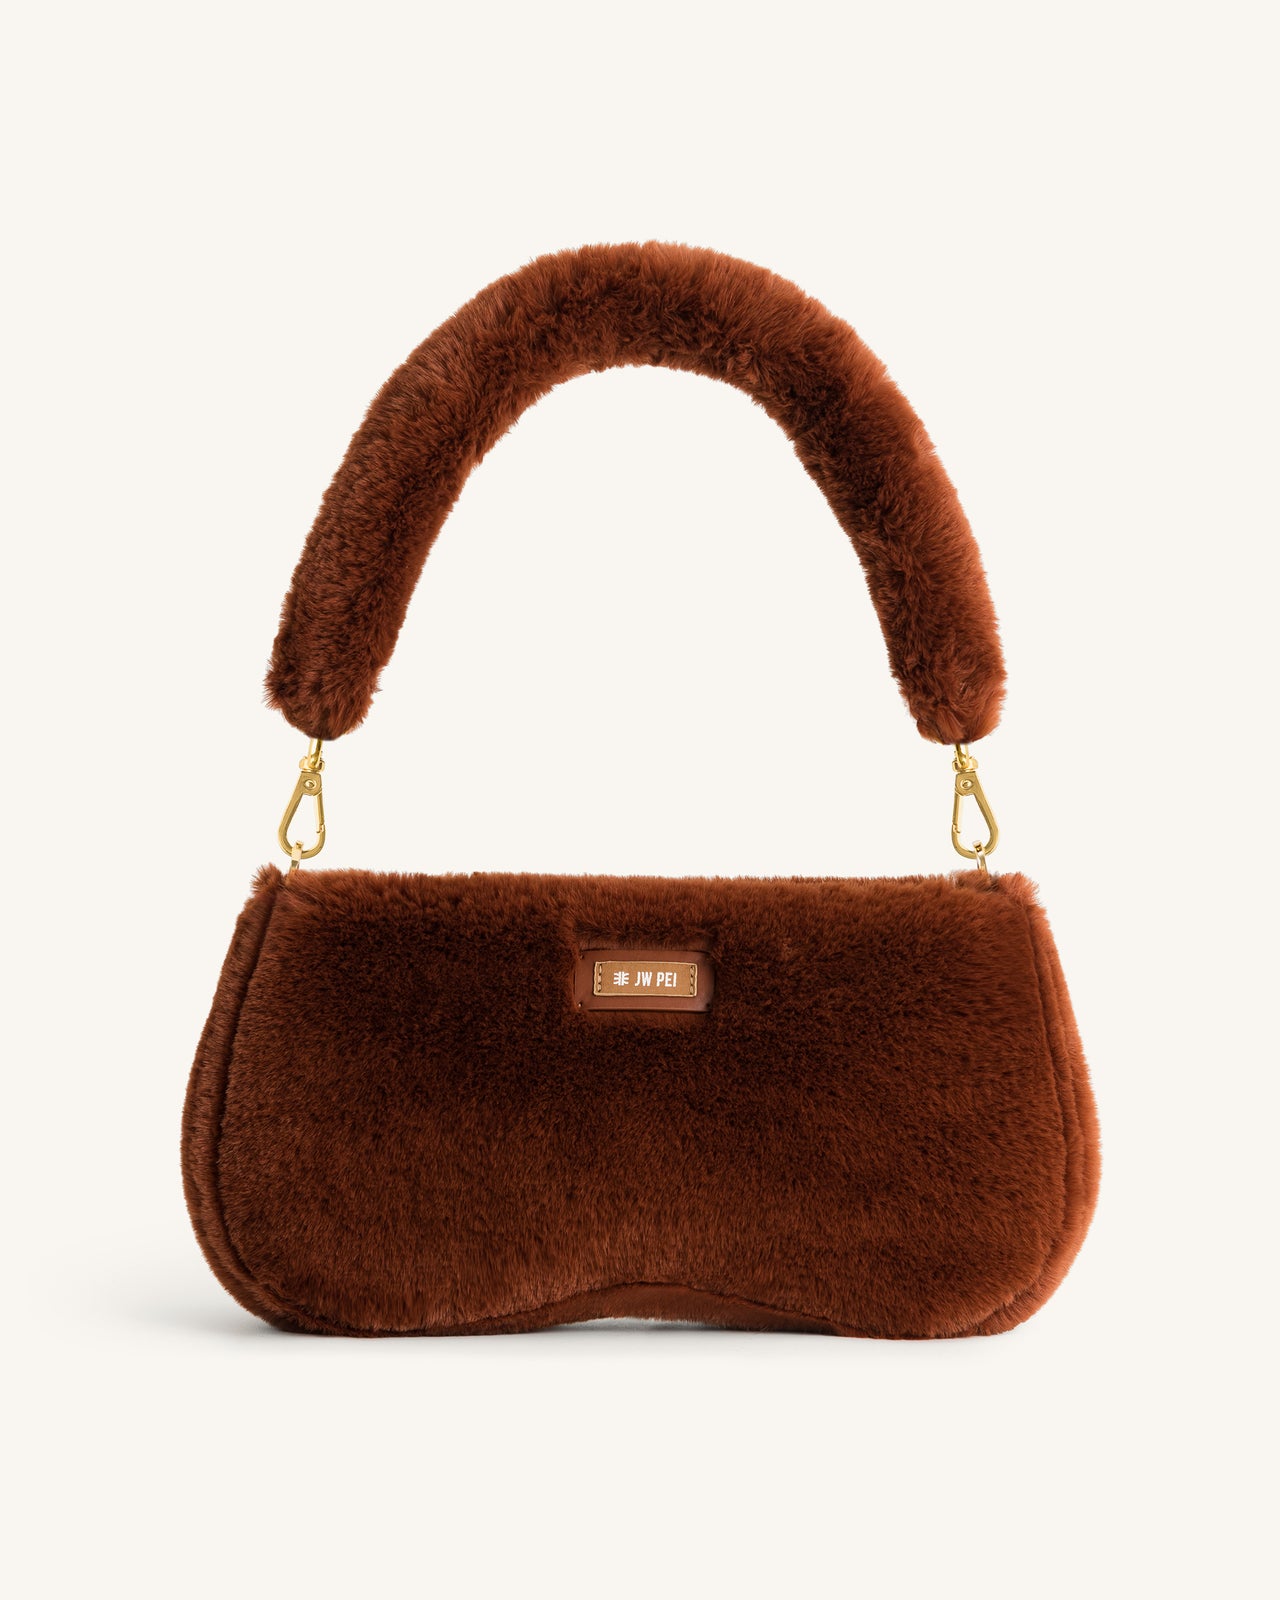 Shop JW PEI EVA BAG 2020 Cruise Casual Style Faux Fur 2WAY Plain Party  Style Office Style by Sharlottechan